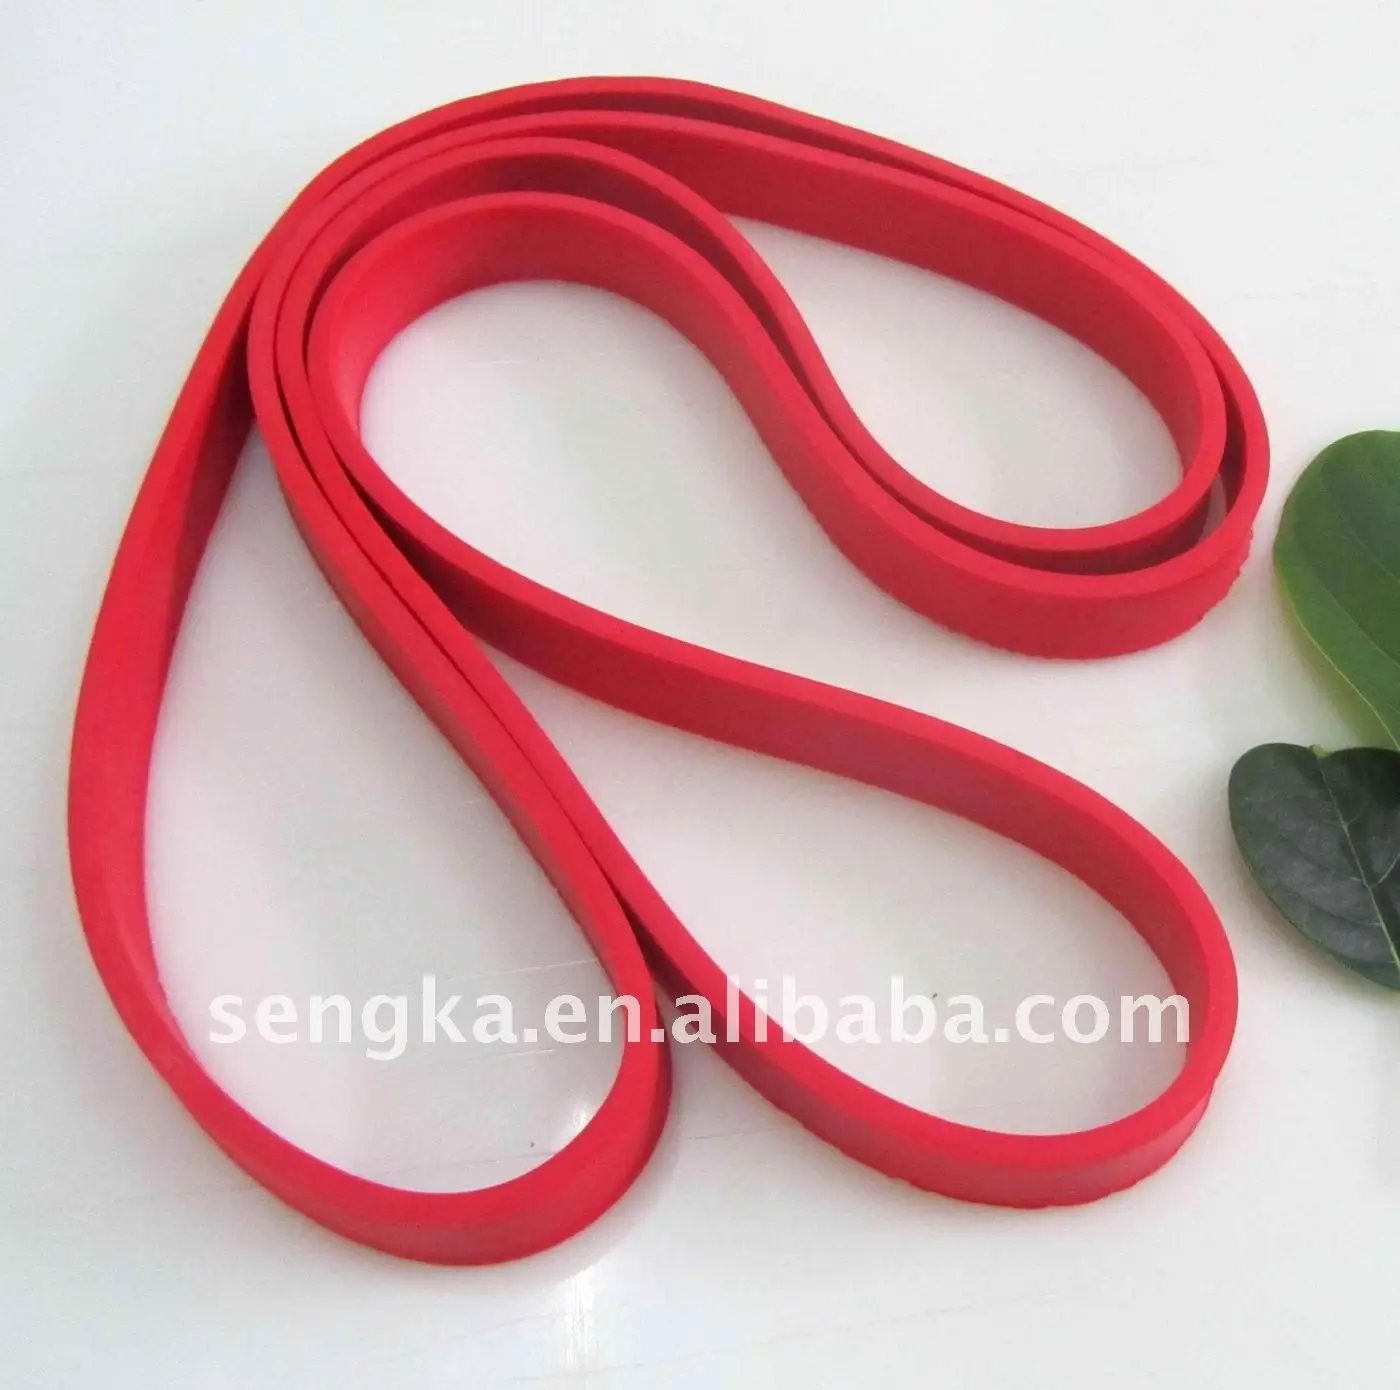 Rubber Band Loop